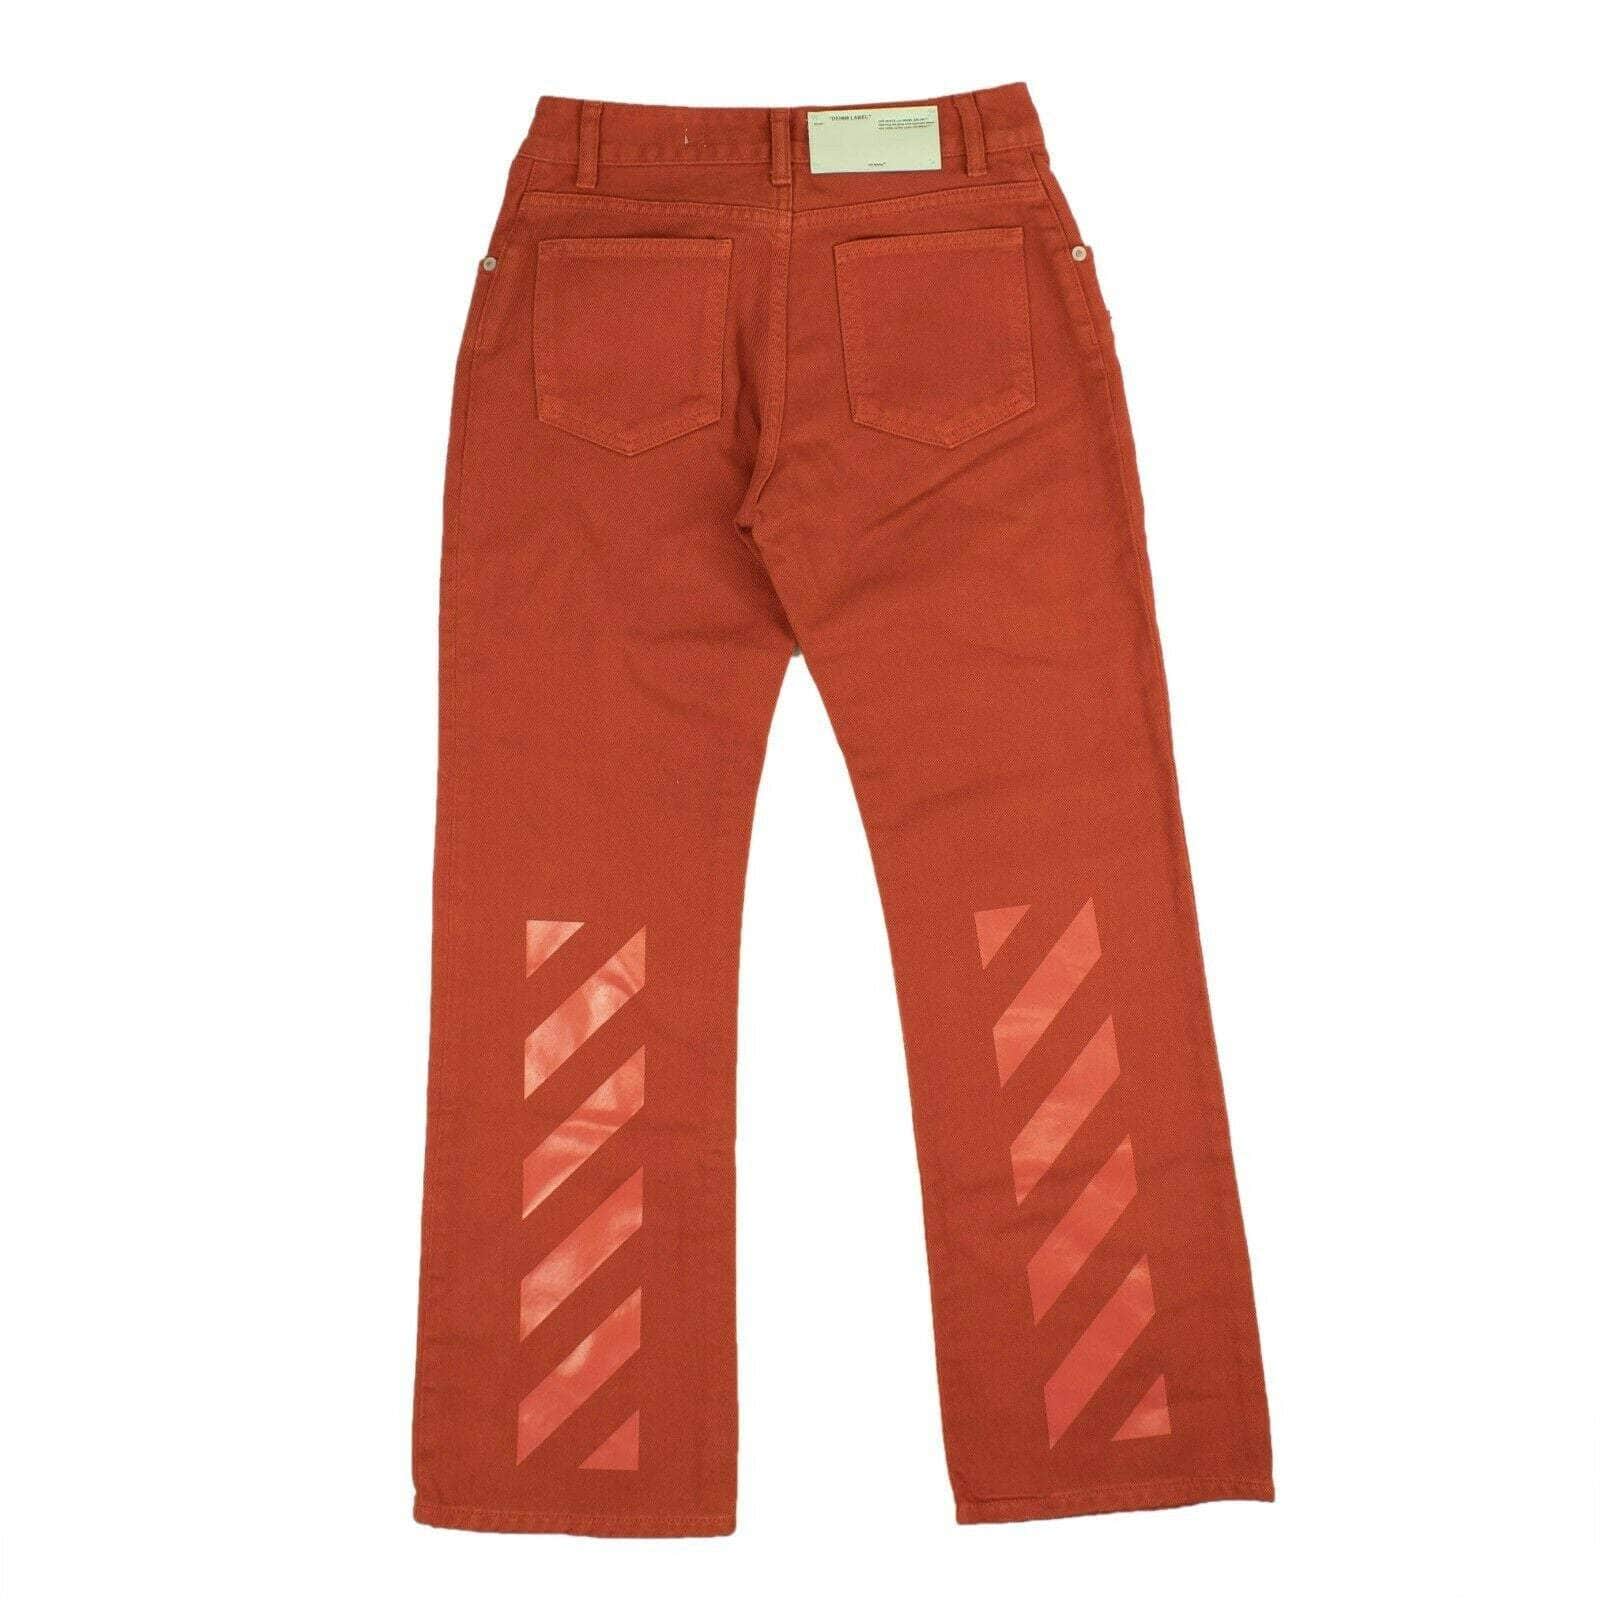 OFF-WHITE c/o VIRGIL ABLOH 250-500, channelenable-all, chicmi, couponcollection, gender-womens, main-clothing, off-white-c-o-virgil-abloh, size-26-us 26 US Orange Diag Stripe Flared Jeans 82NGG-OW-1959/26 82NGG-OW-1959/26